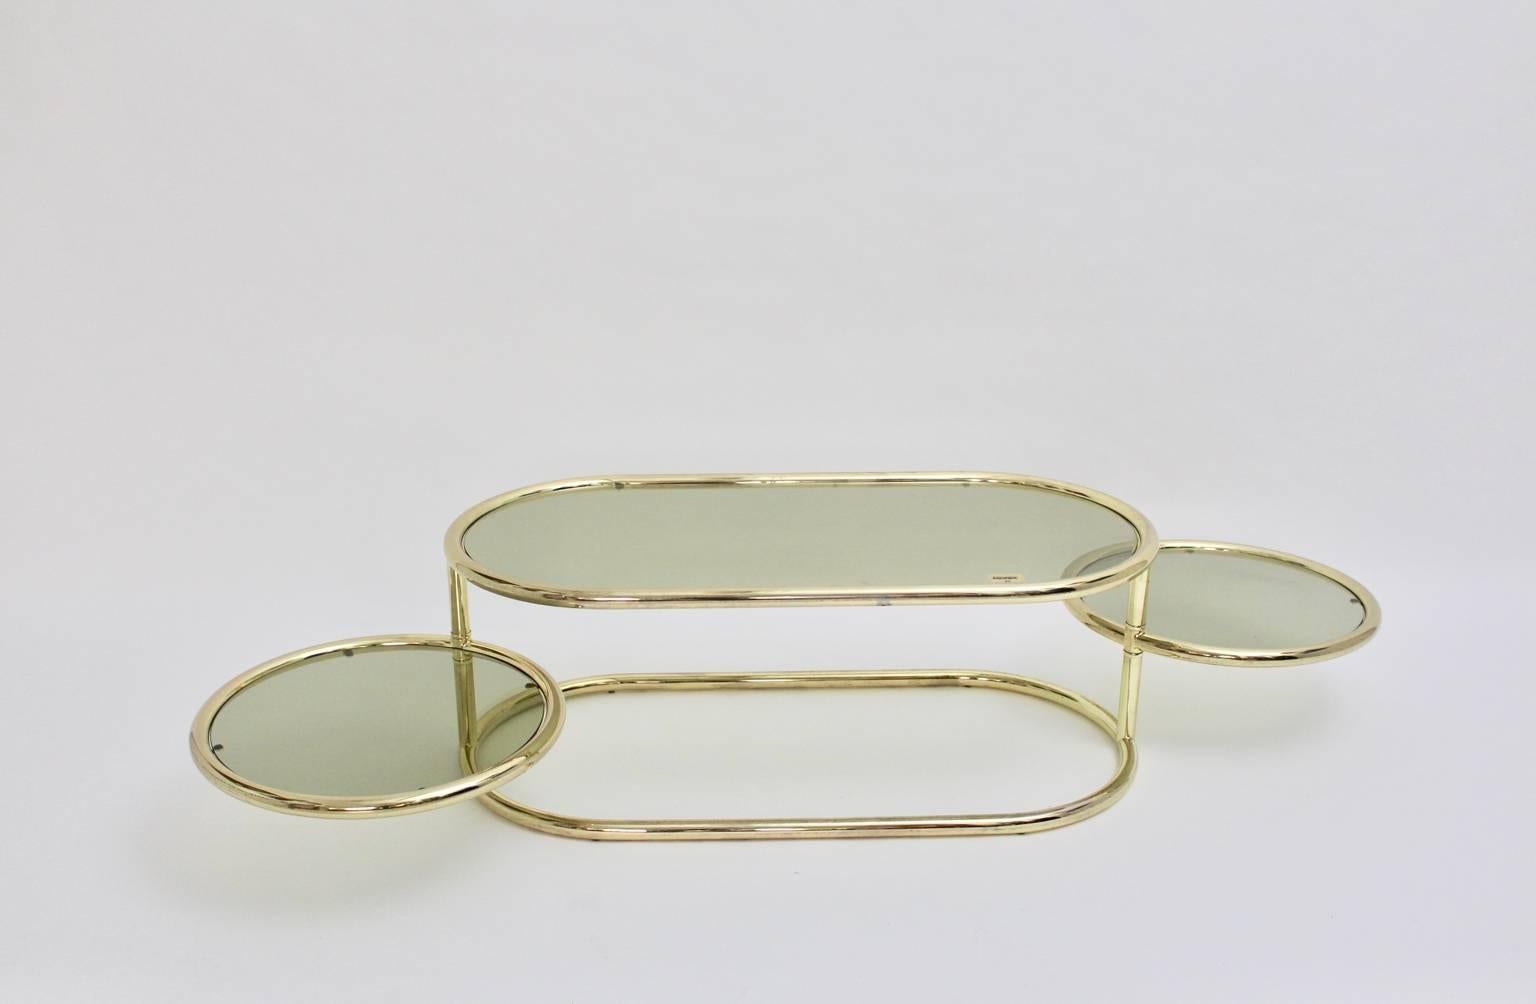 20th Century Brass Swiveling Vintage Coffee Table Green Smoked Glass Plates by Morex 1970s